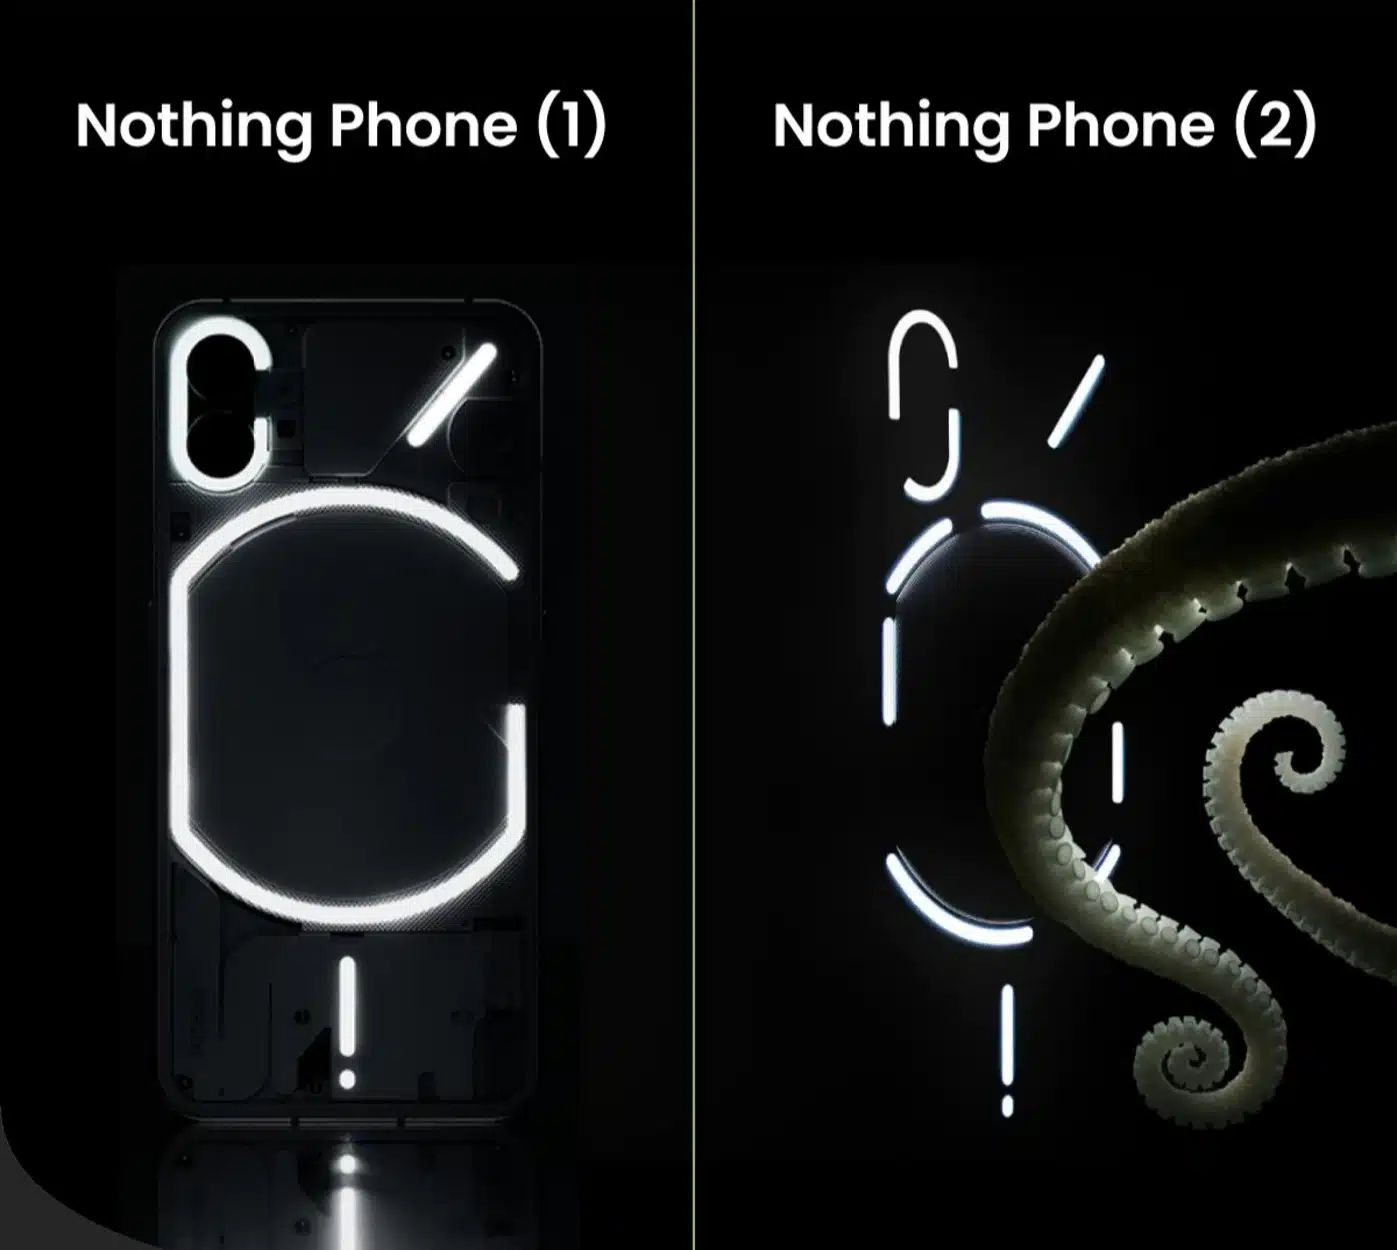 Nothing phone 1 and nothing phone 2 glyph interface comparison 